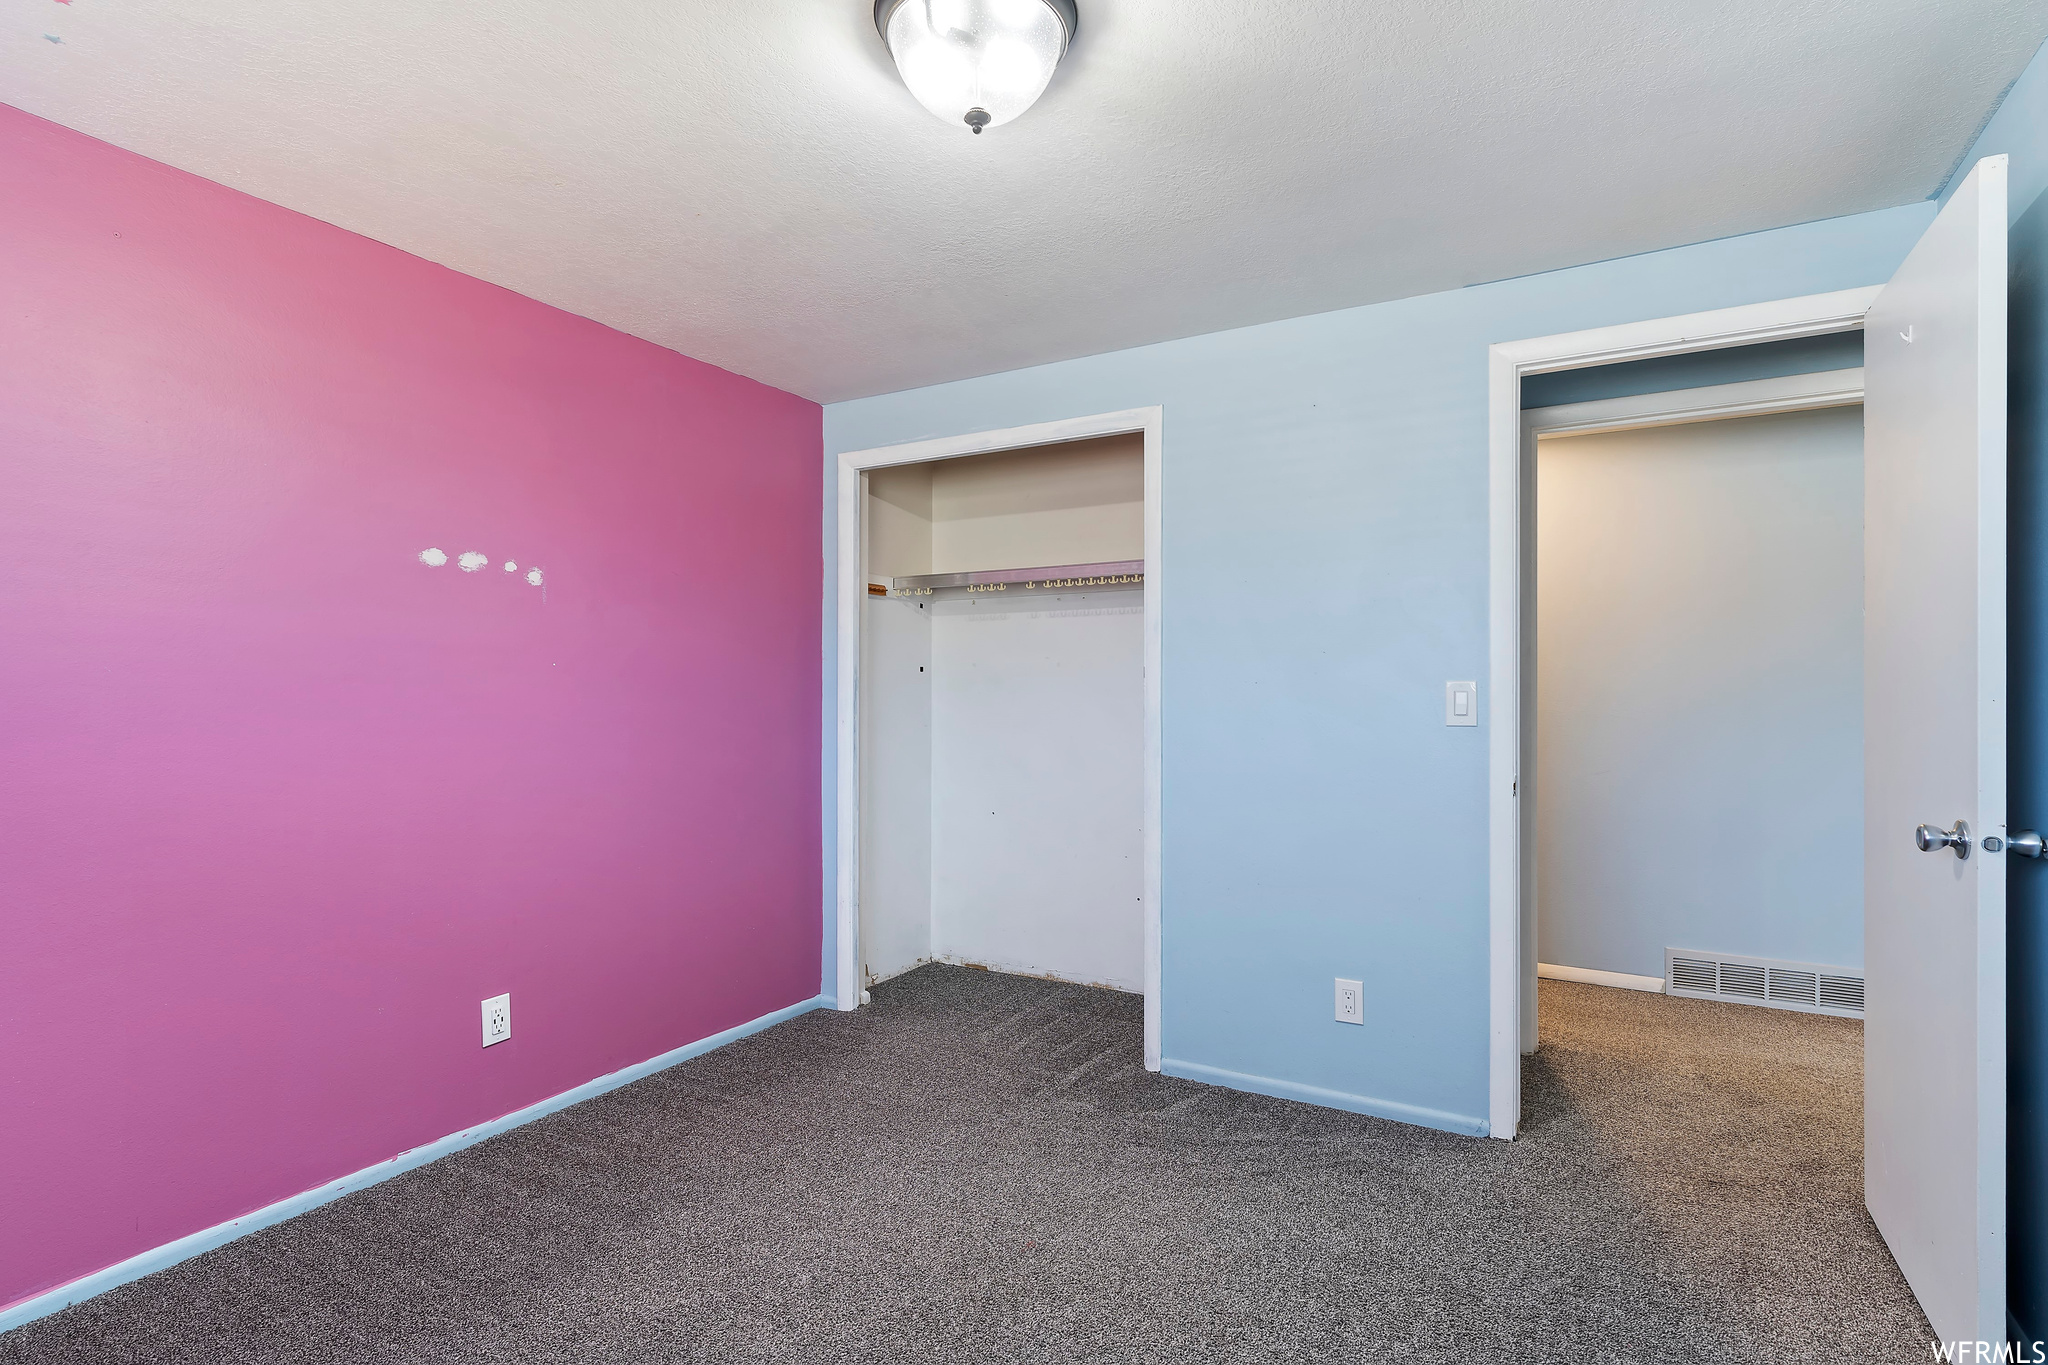 Unfurnished bedroom featuring dark carpet and a closet